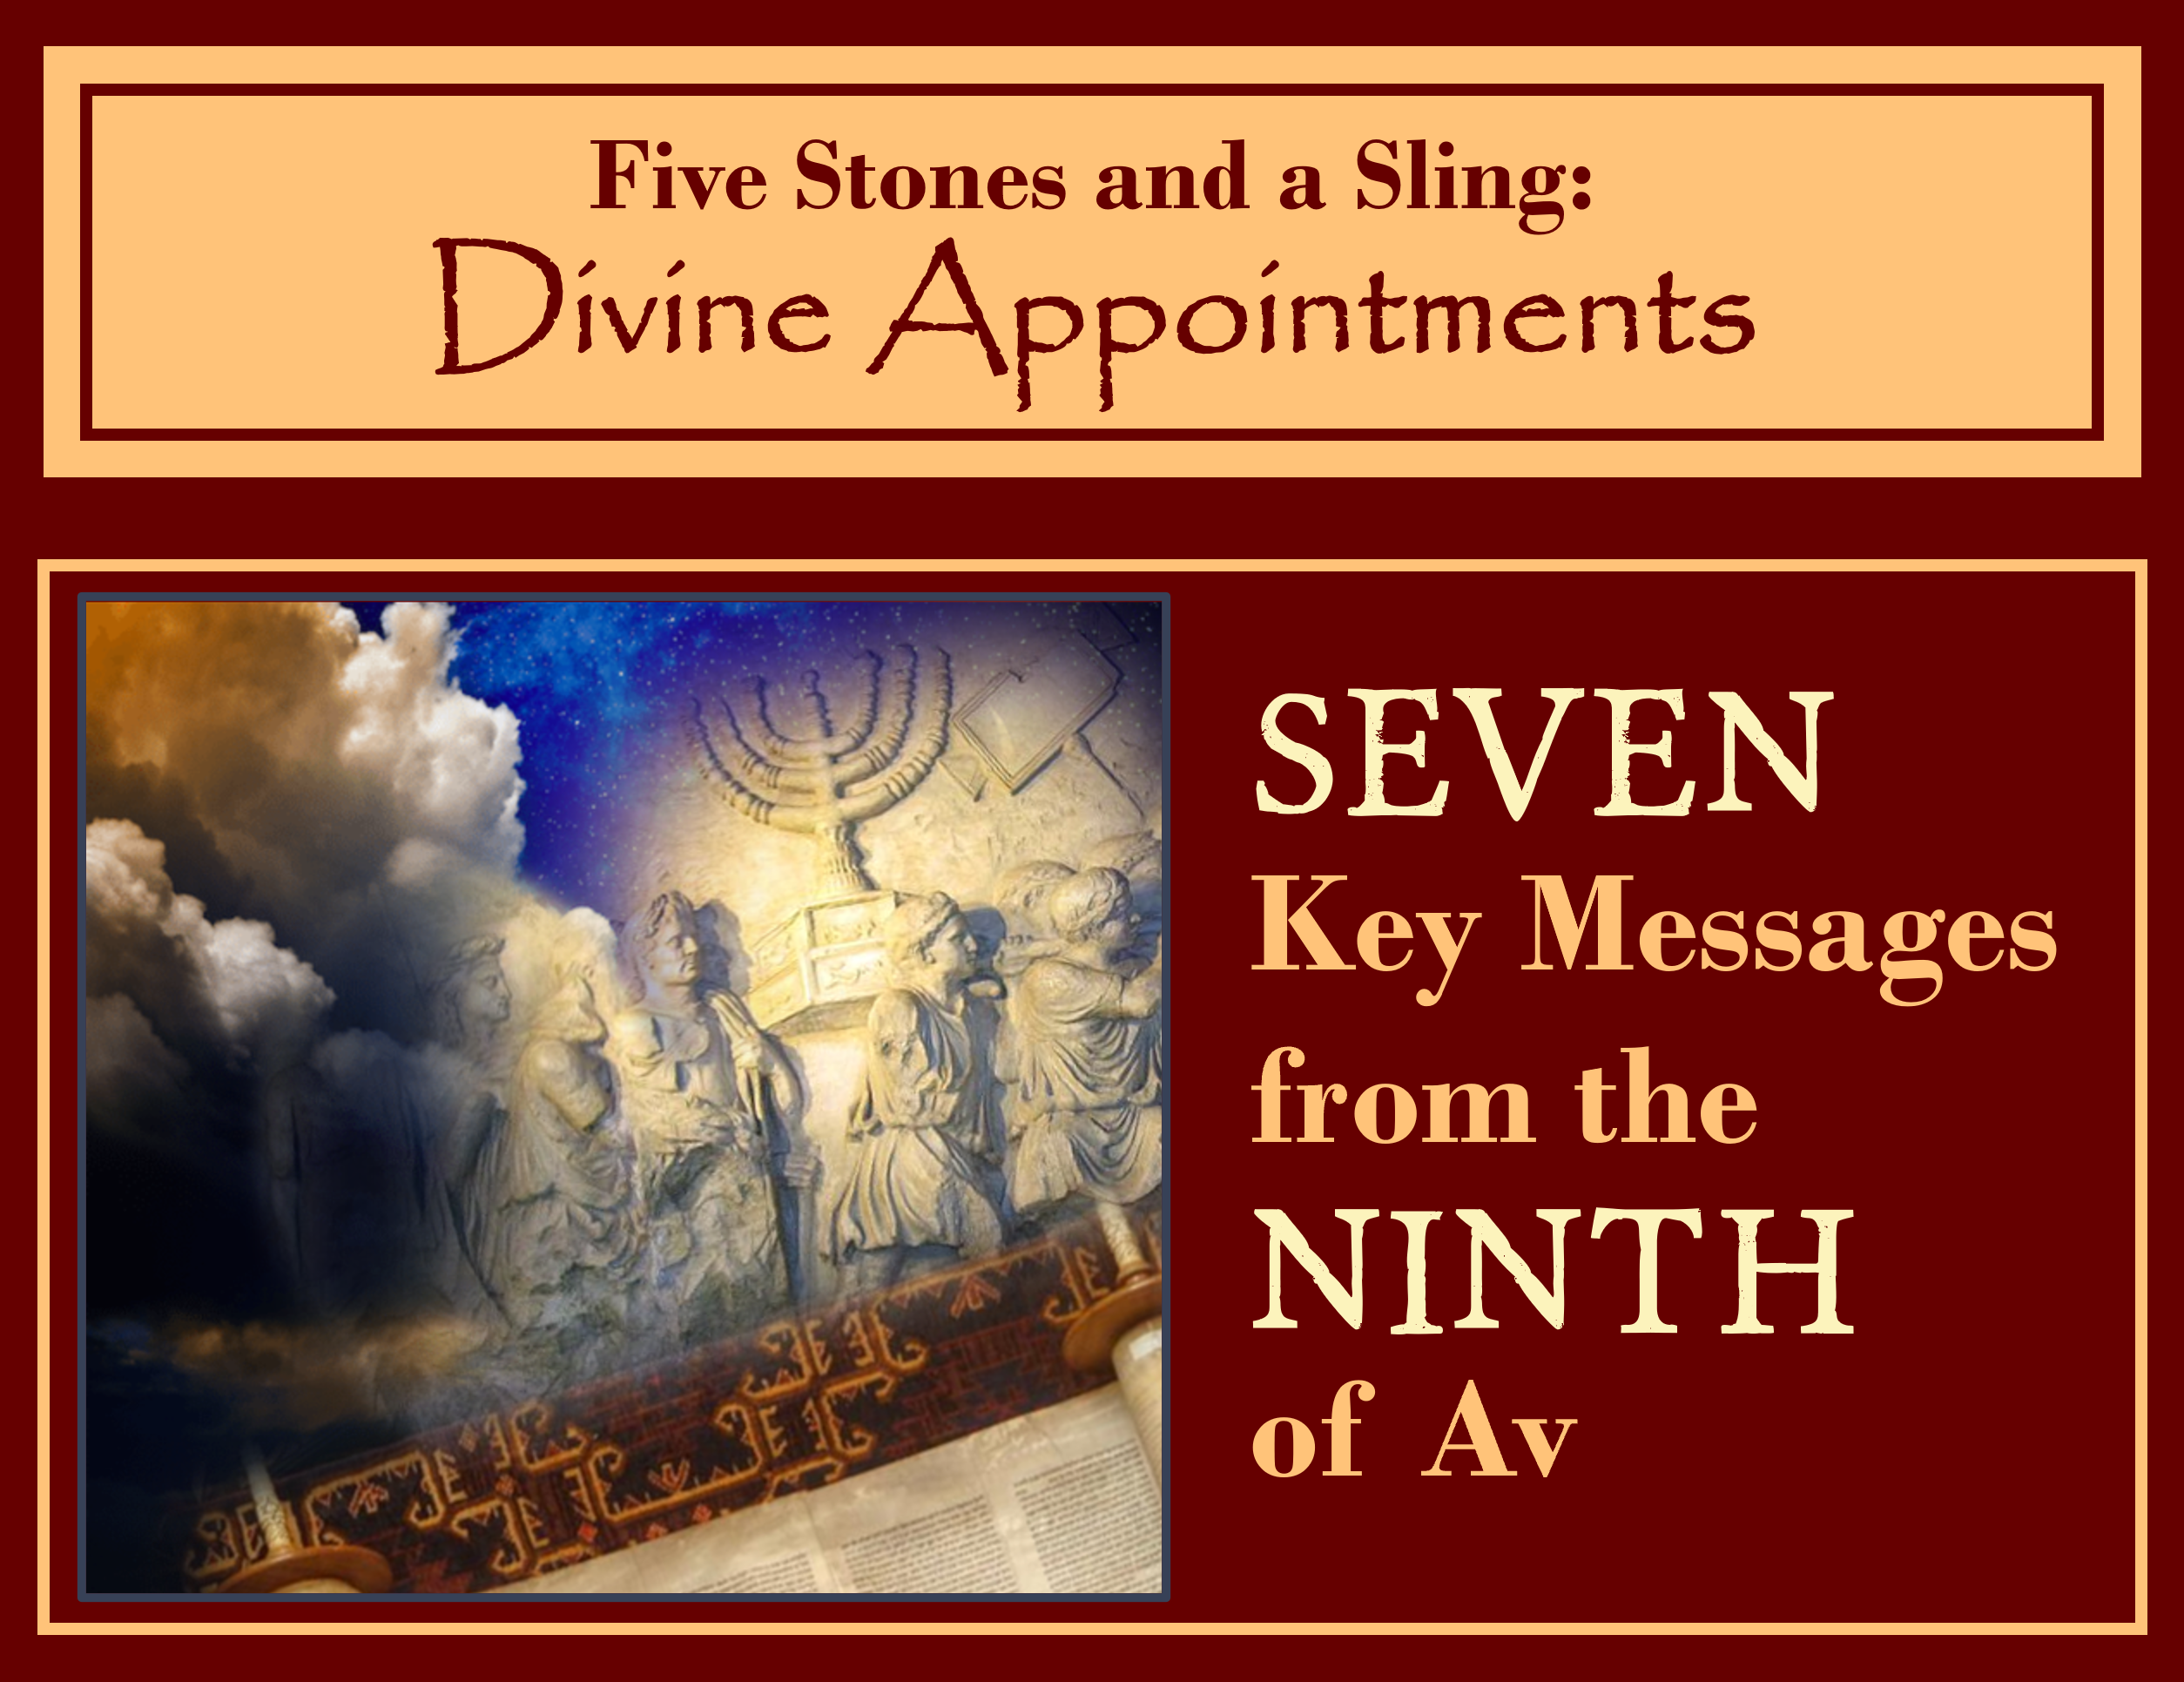 Seven Key Messages from the Ninth of Av